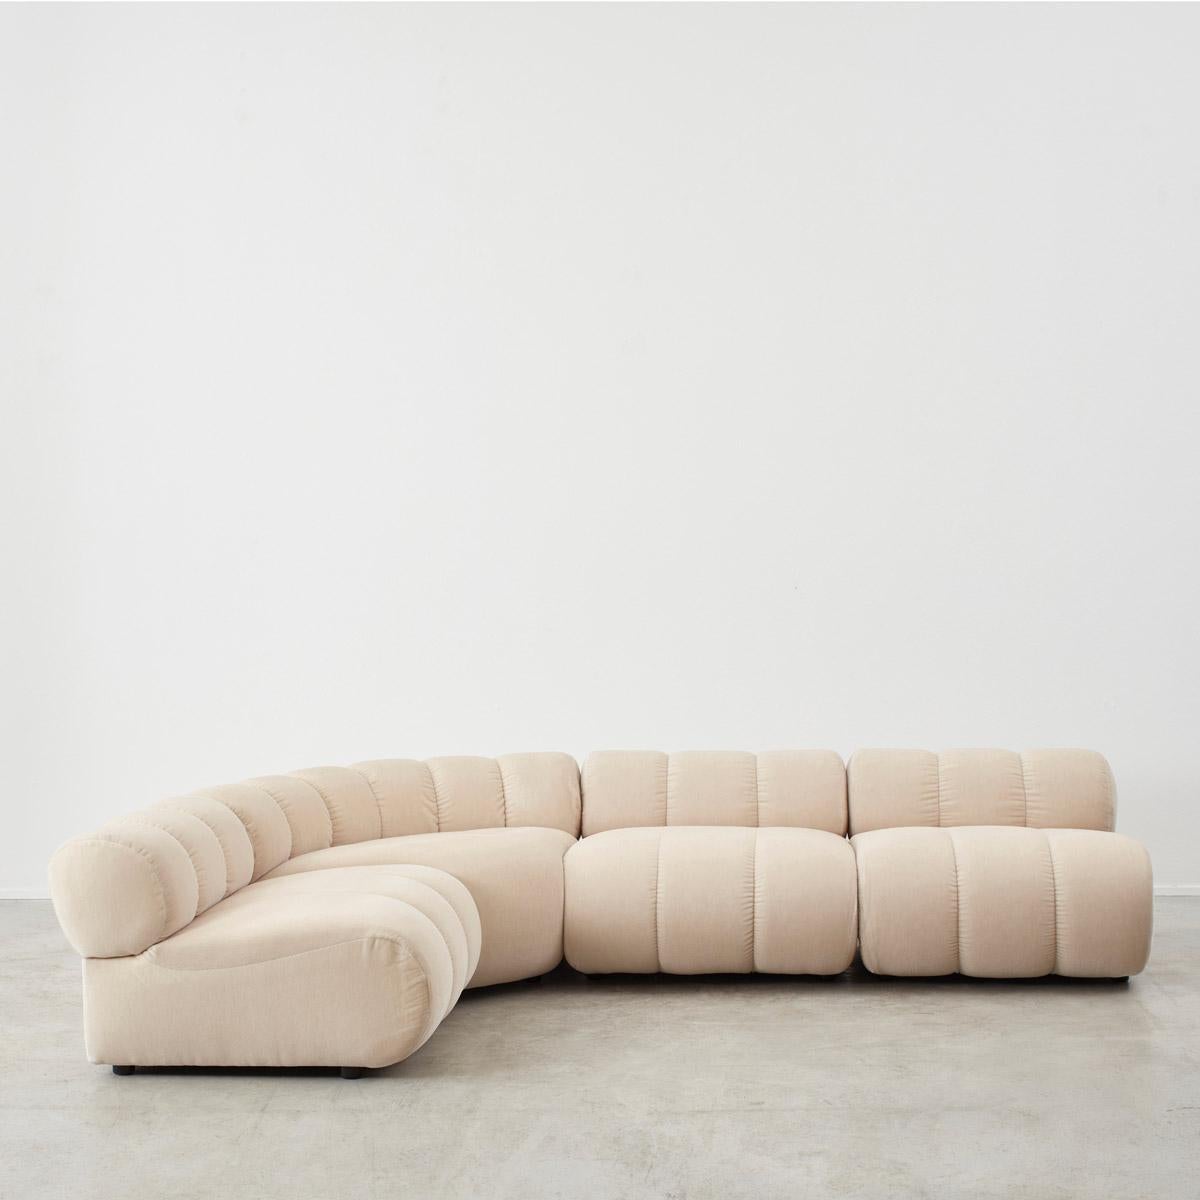 Module: H65 W90 D90cm
Corner module: H65 W140 D95cm

This modular sofa by Guiseppe Munari resembles that of a cloud, both in form and comfort. Designed for Poltronova, it consists of four modular elements with integrated backrests. Their modularity